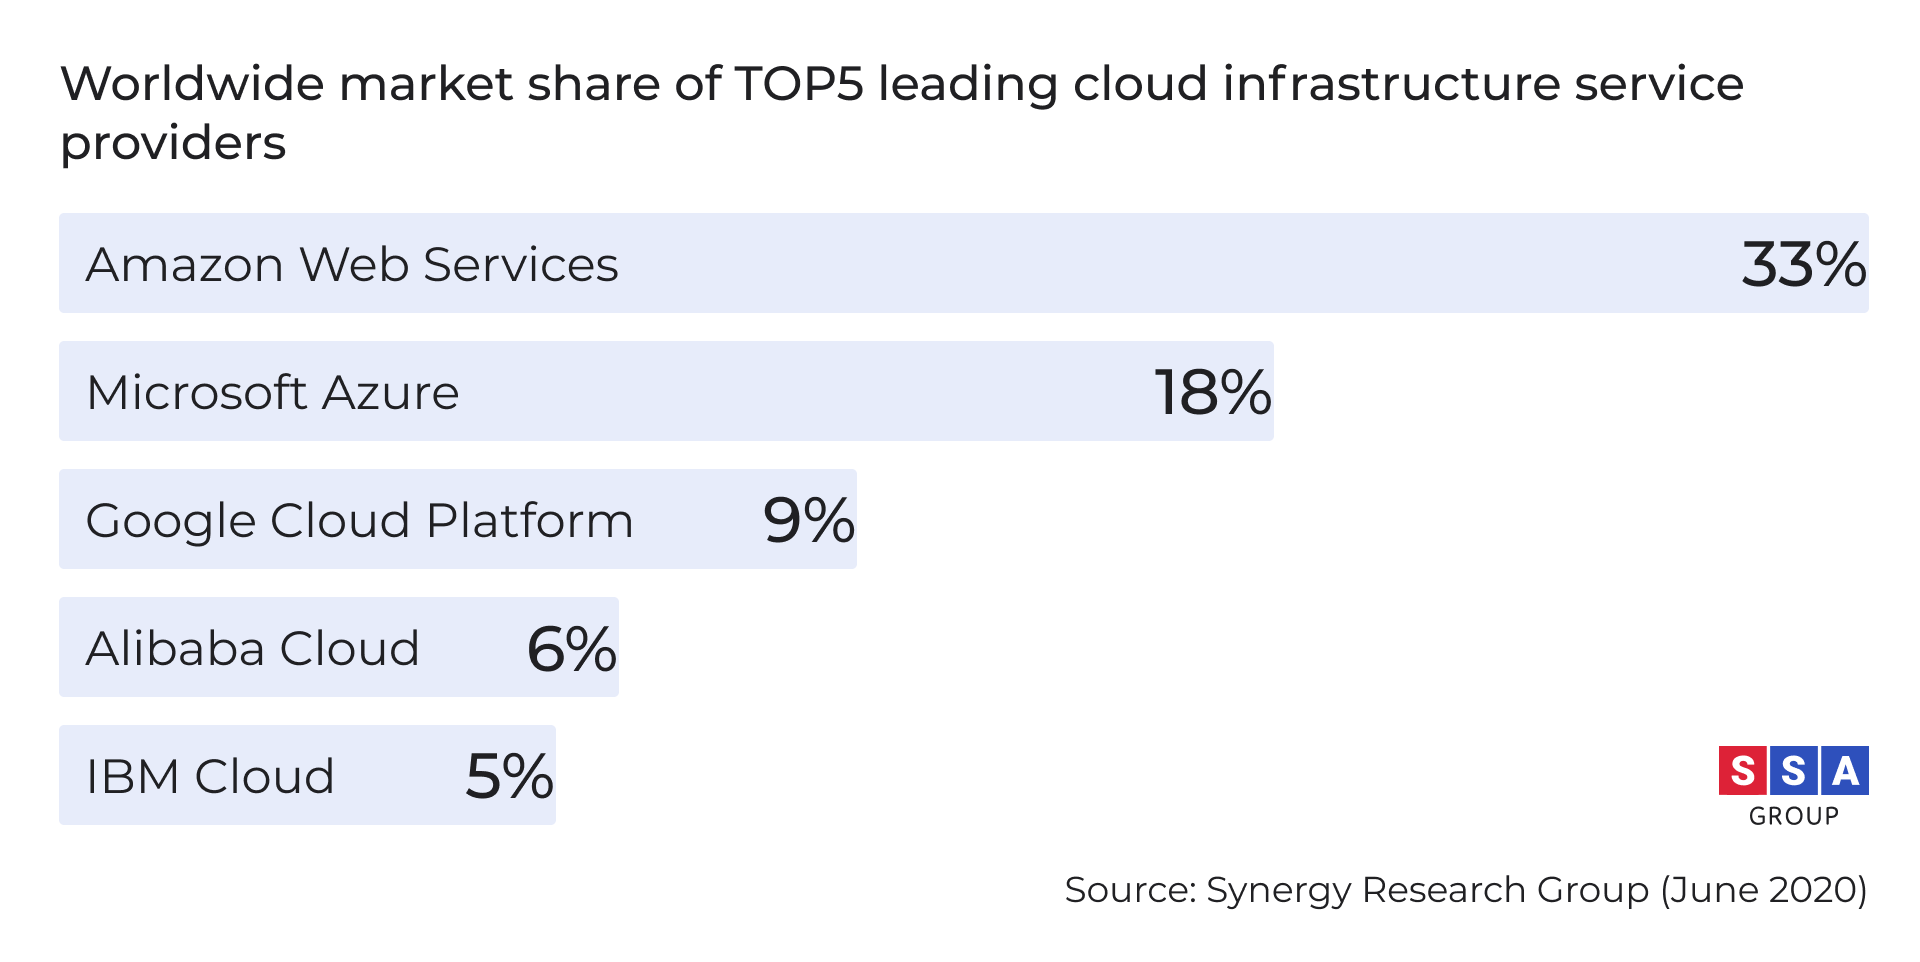 TOP5 leading cloud service providers